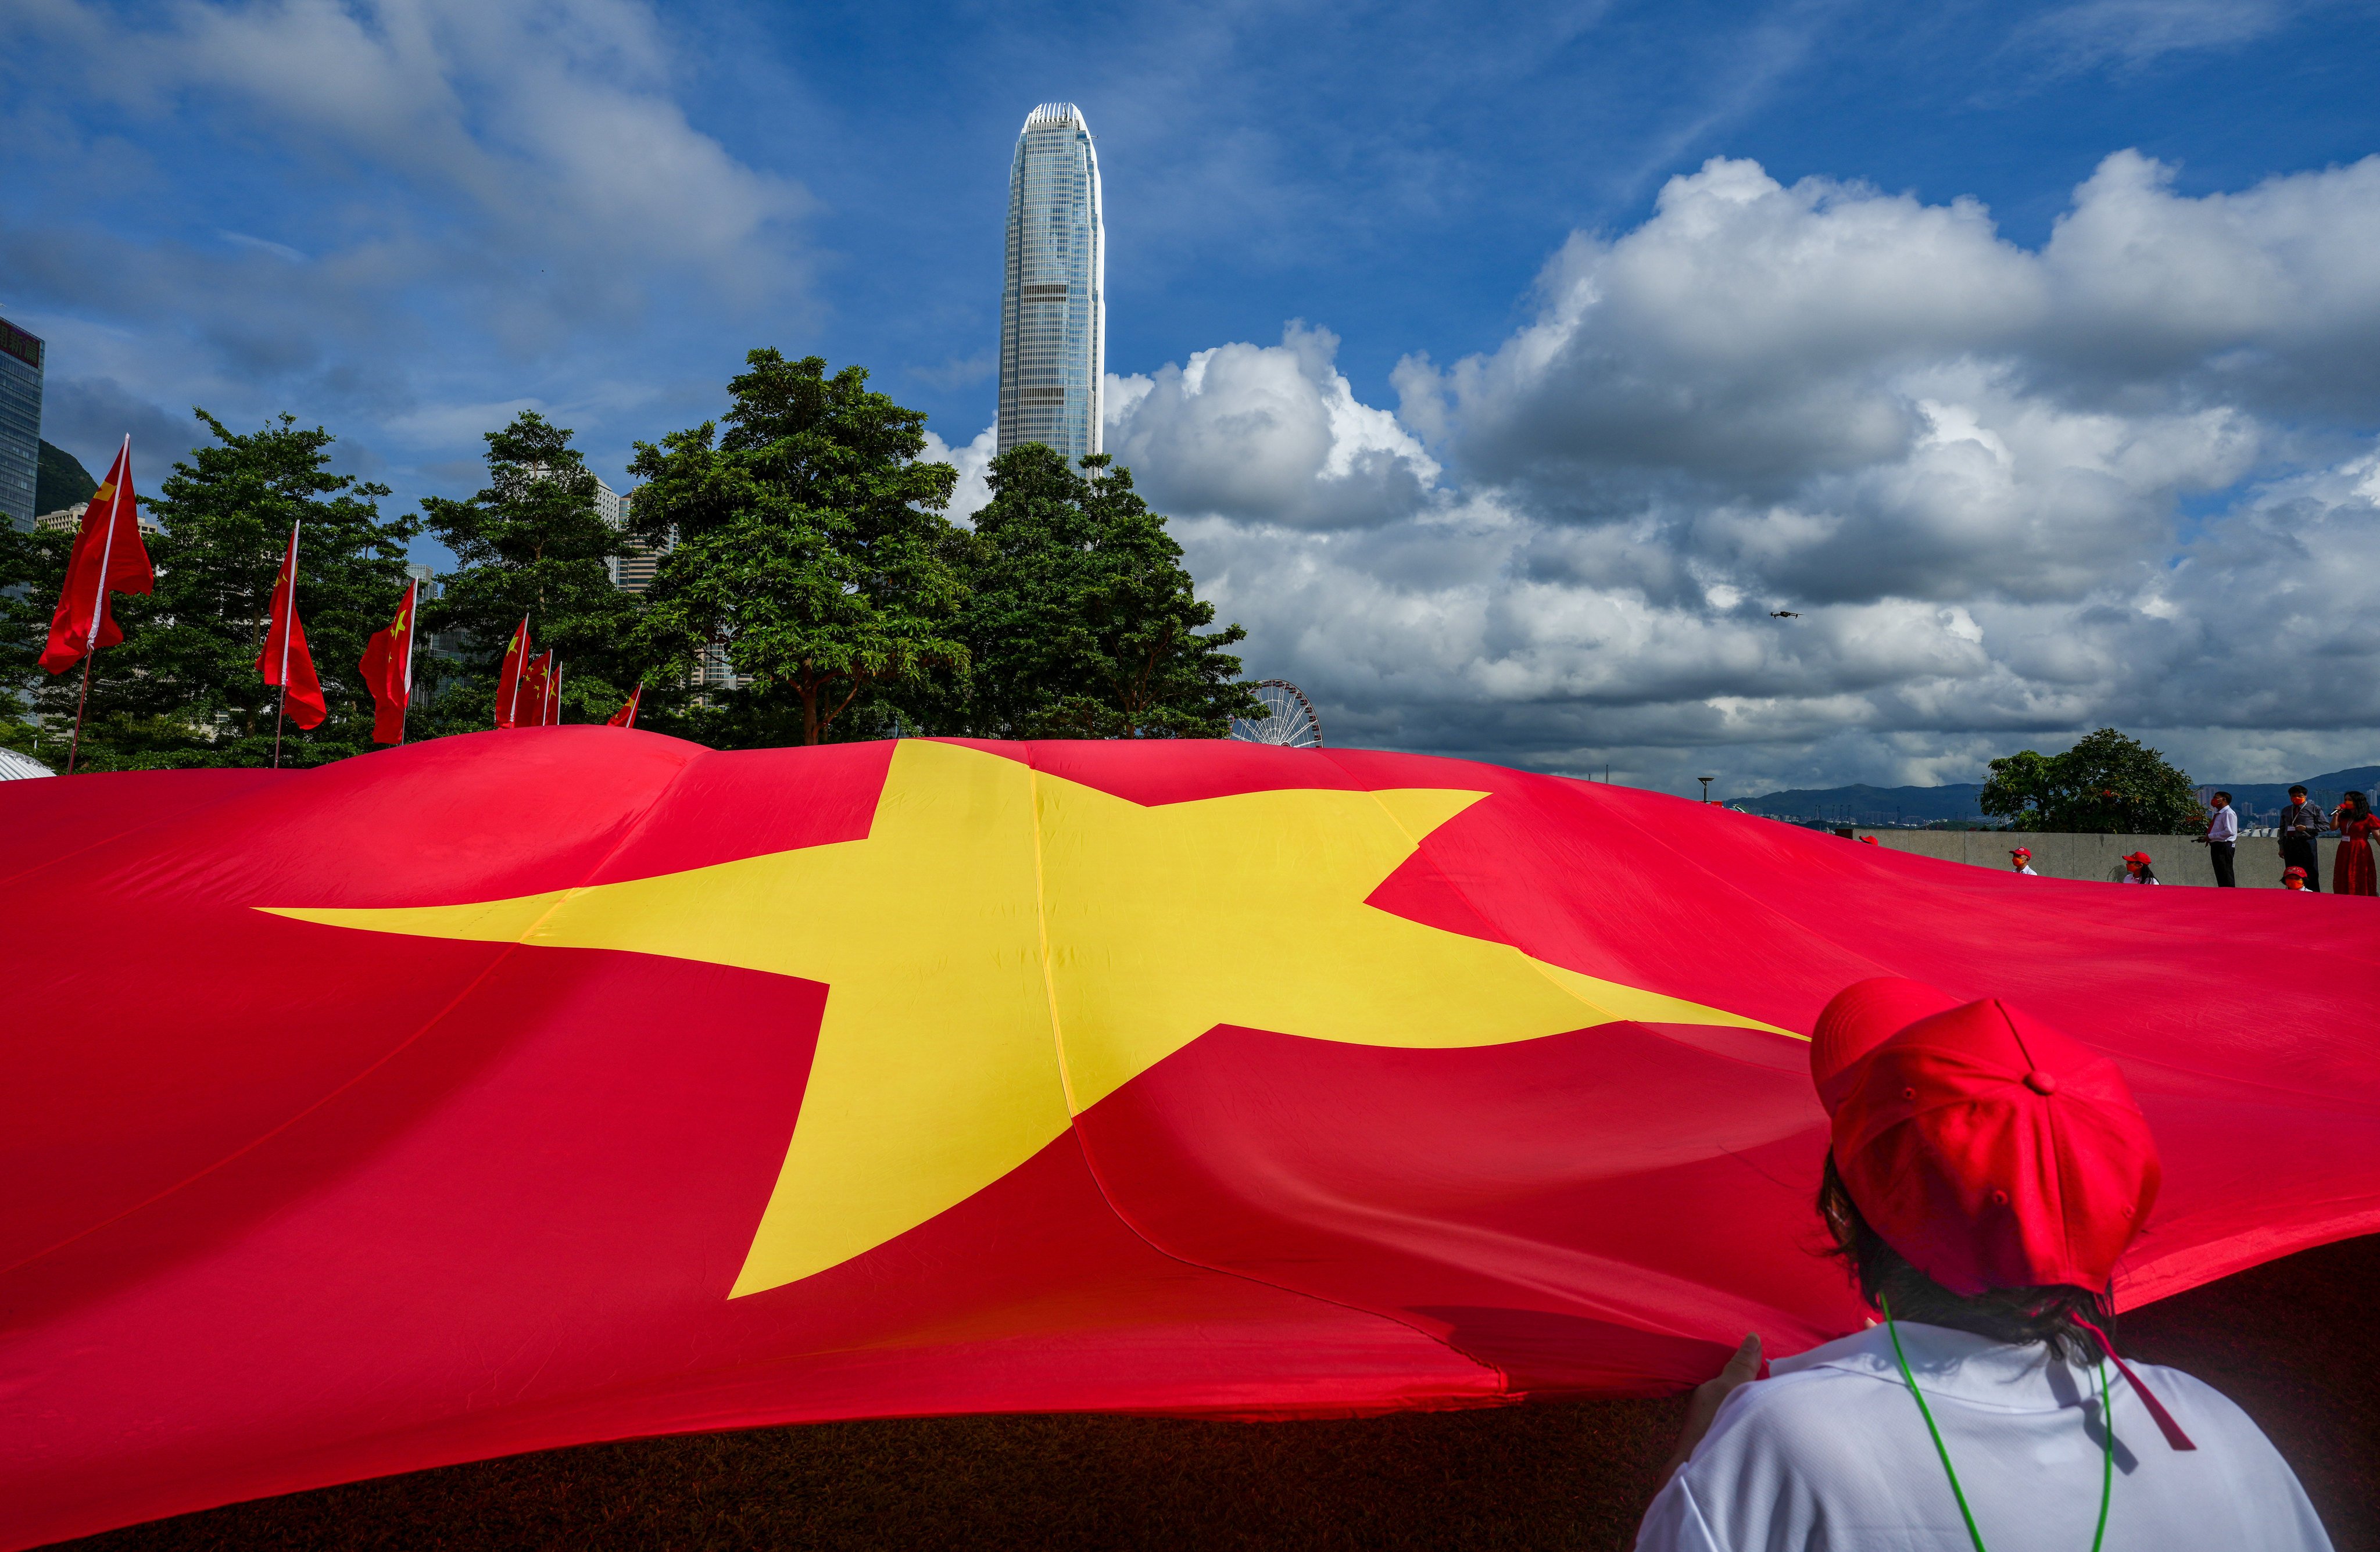 The national flag at a 2022 ceremony. Paul Lam did not elaborate on the plans to deal with sanctions, citing the “complicated” geopolitical situation. Photo: Sam Tsang